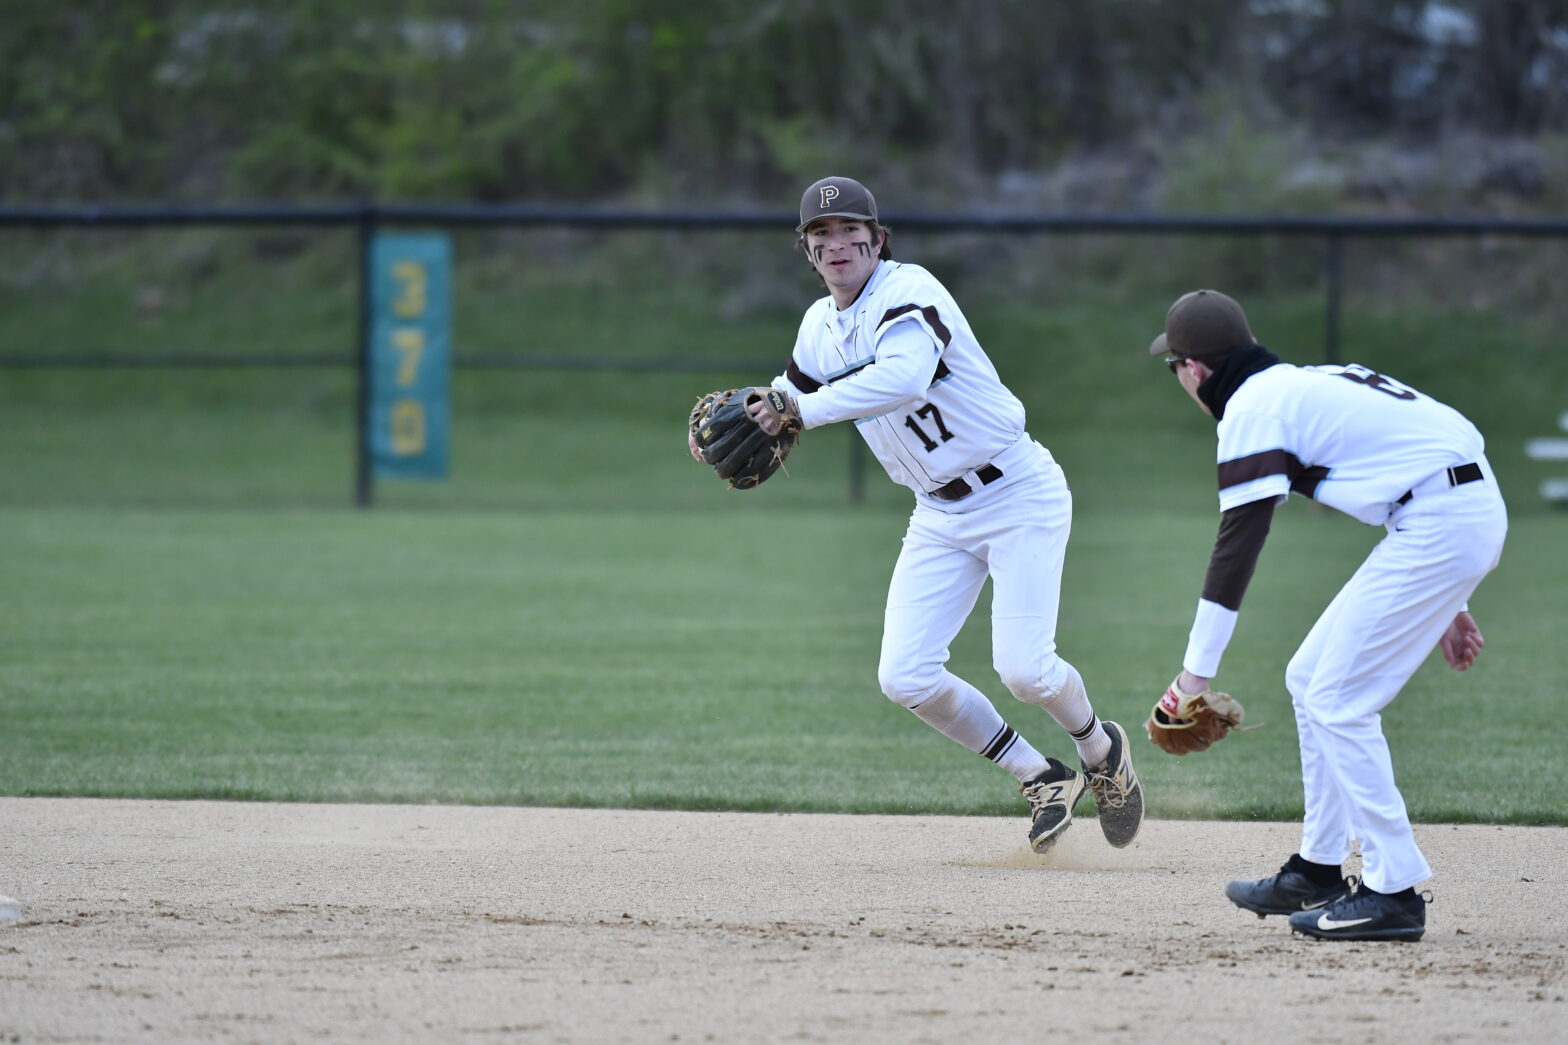 Senior Ryan Gilbert Selected to Play in President’s Cup All-Star High School Baseball Game